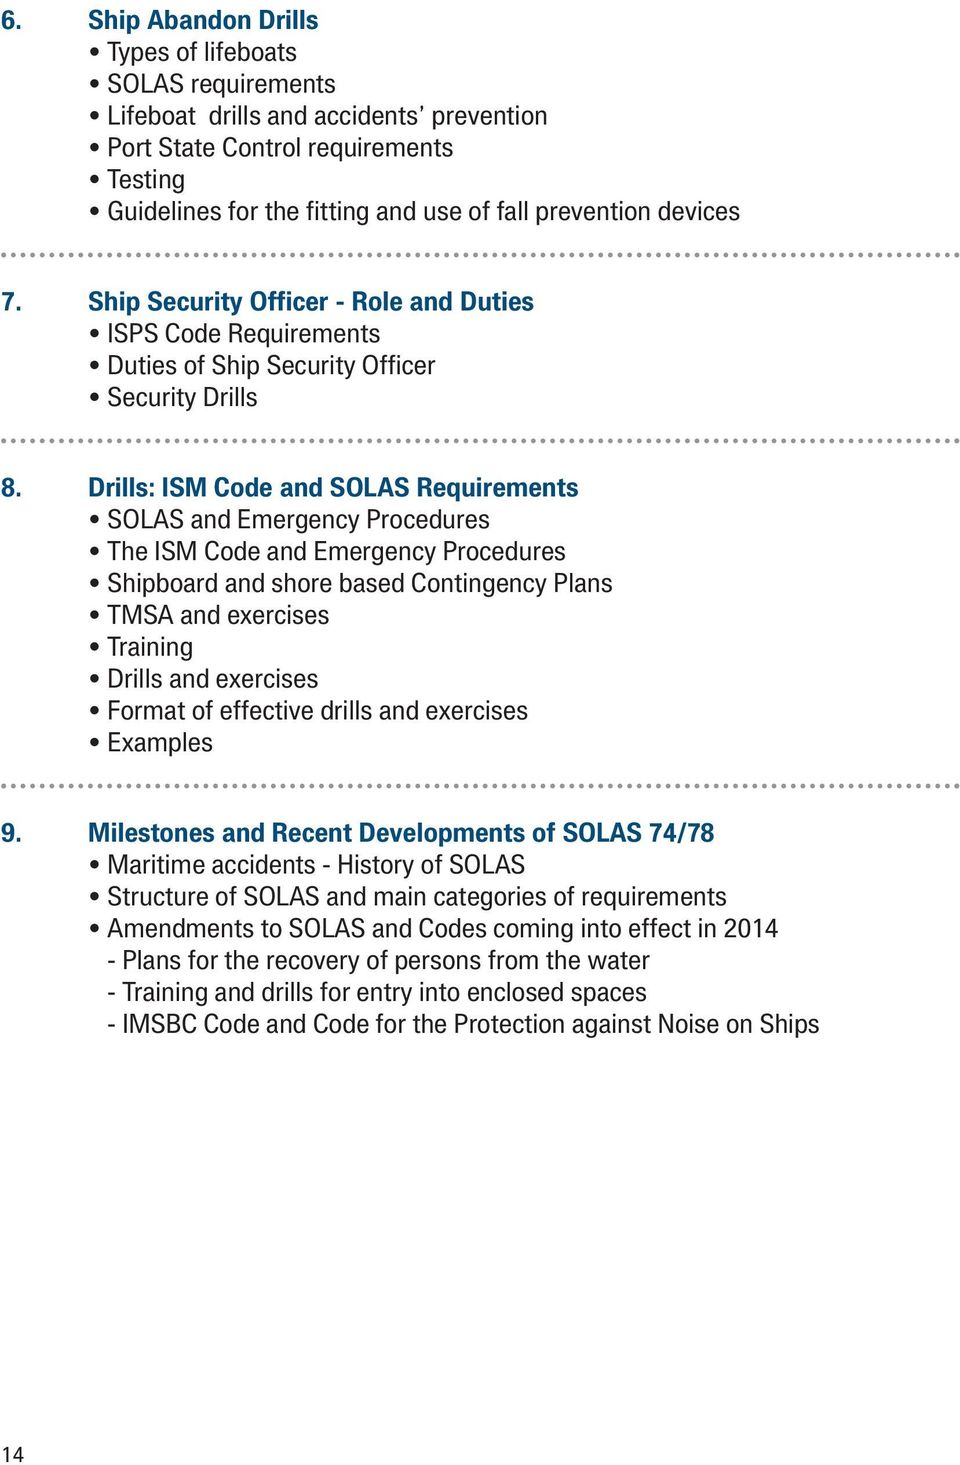 Drills: ISM Code and SOLAS Requirements SOLAS and Emergency Procedures The ISM Code and Emergency Procedures Shipboard and shore based Contingency Plans TMSA and exercises Training Drills and